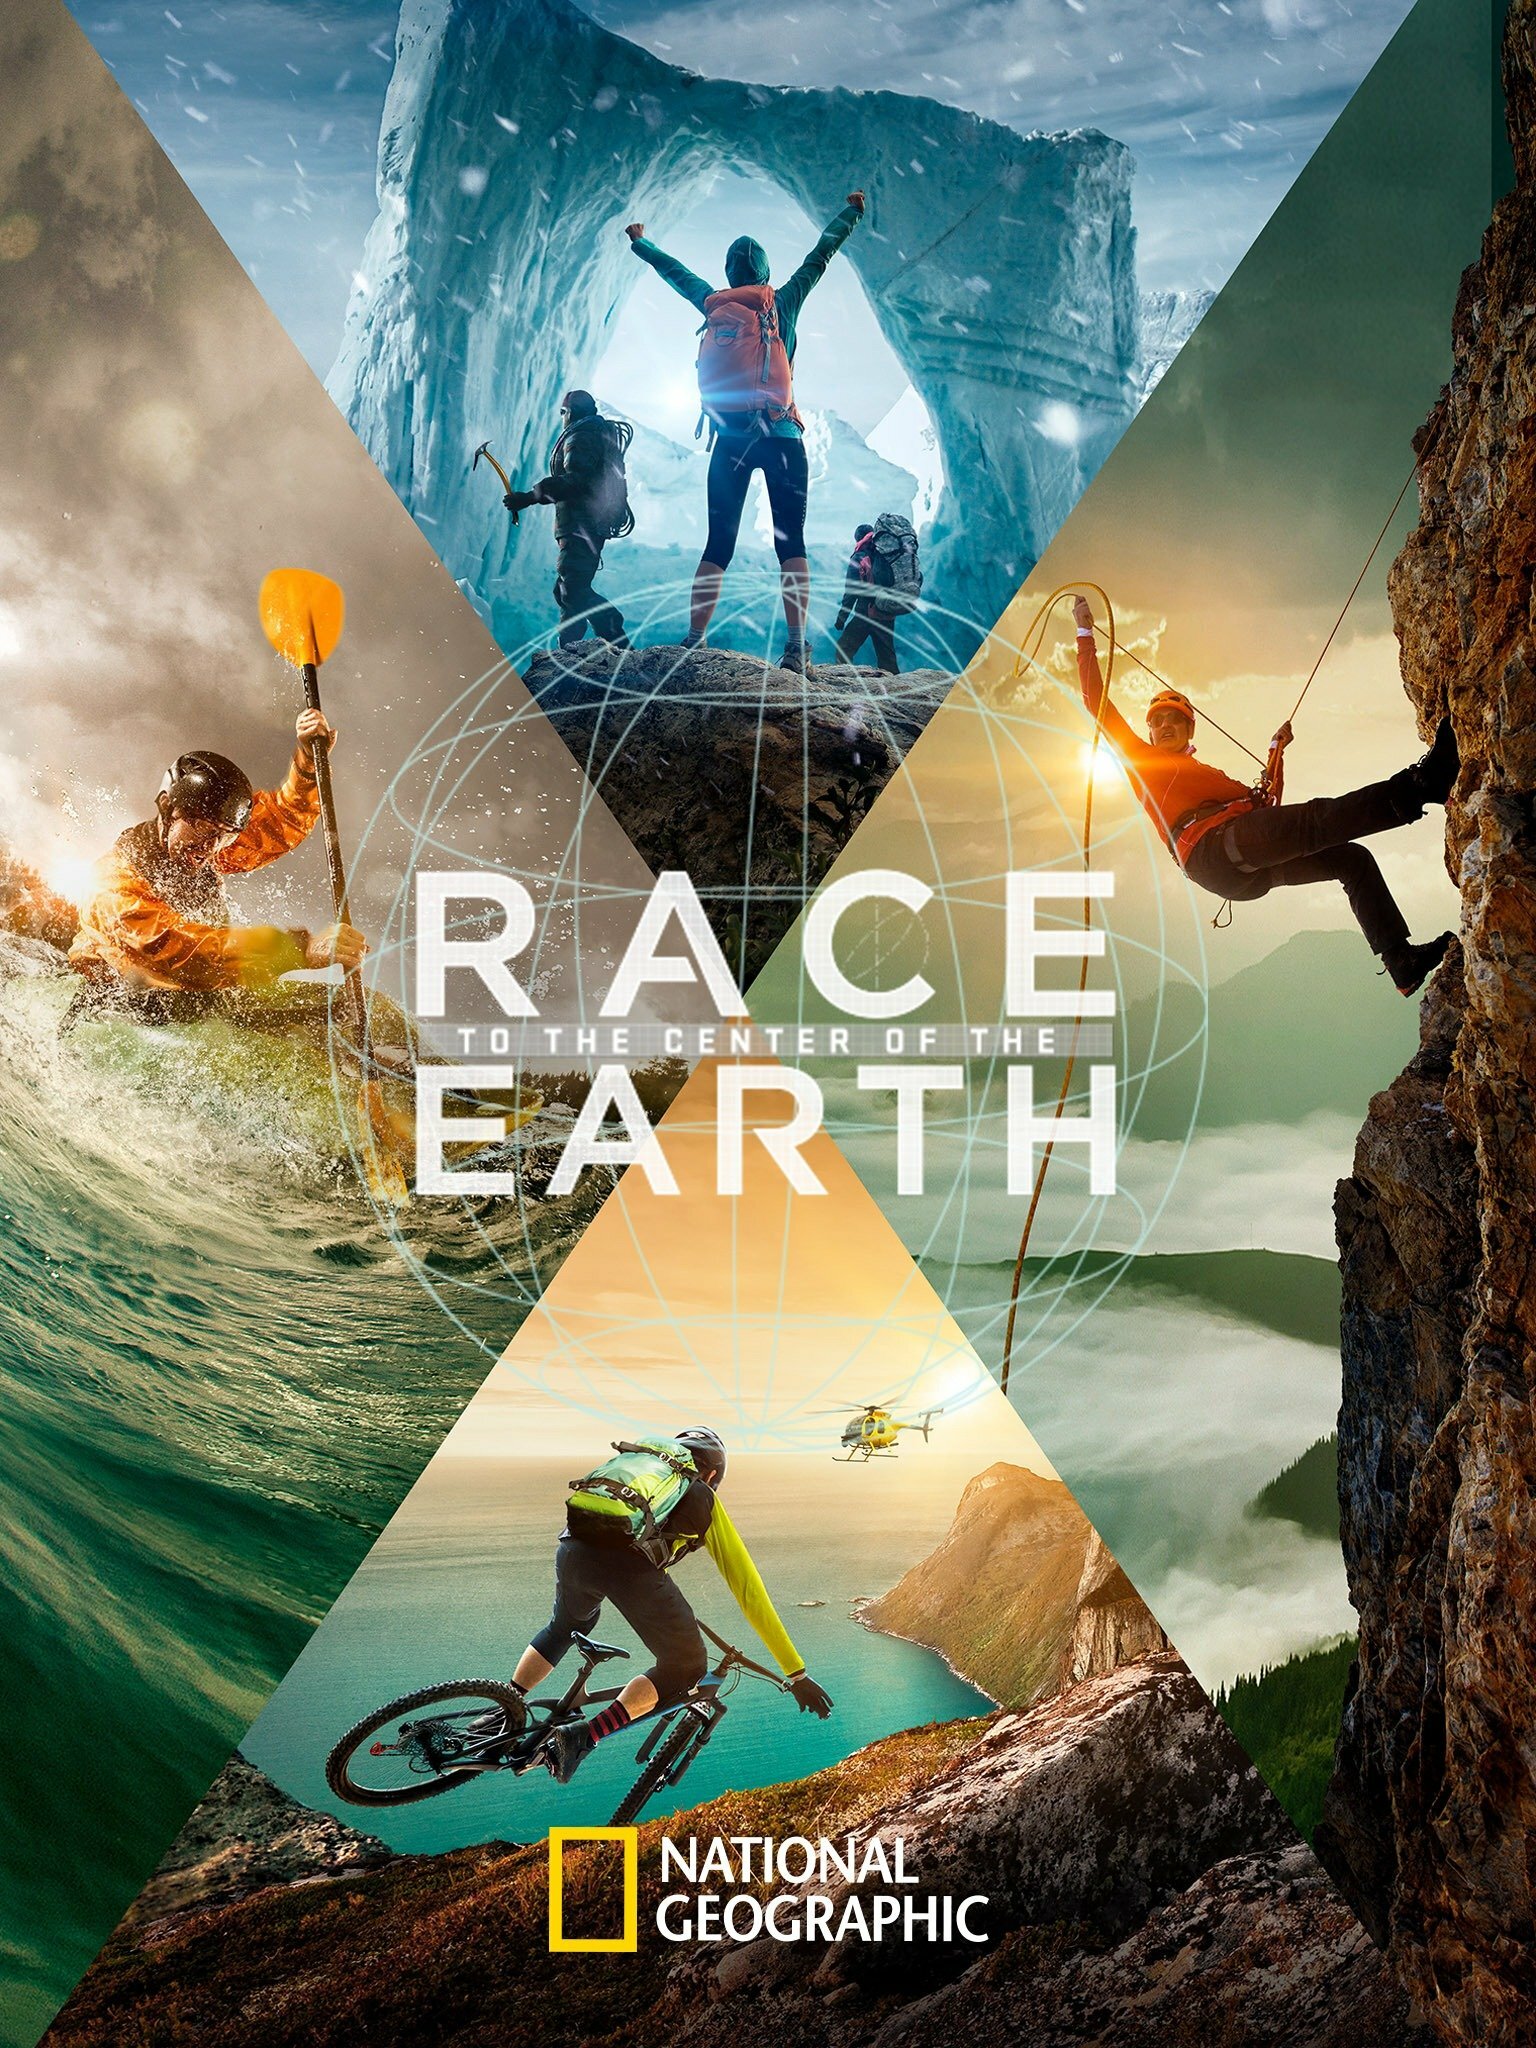 Race to the Center of the Earth ne zaman